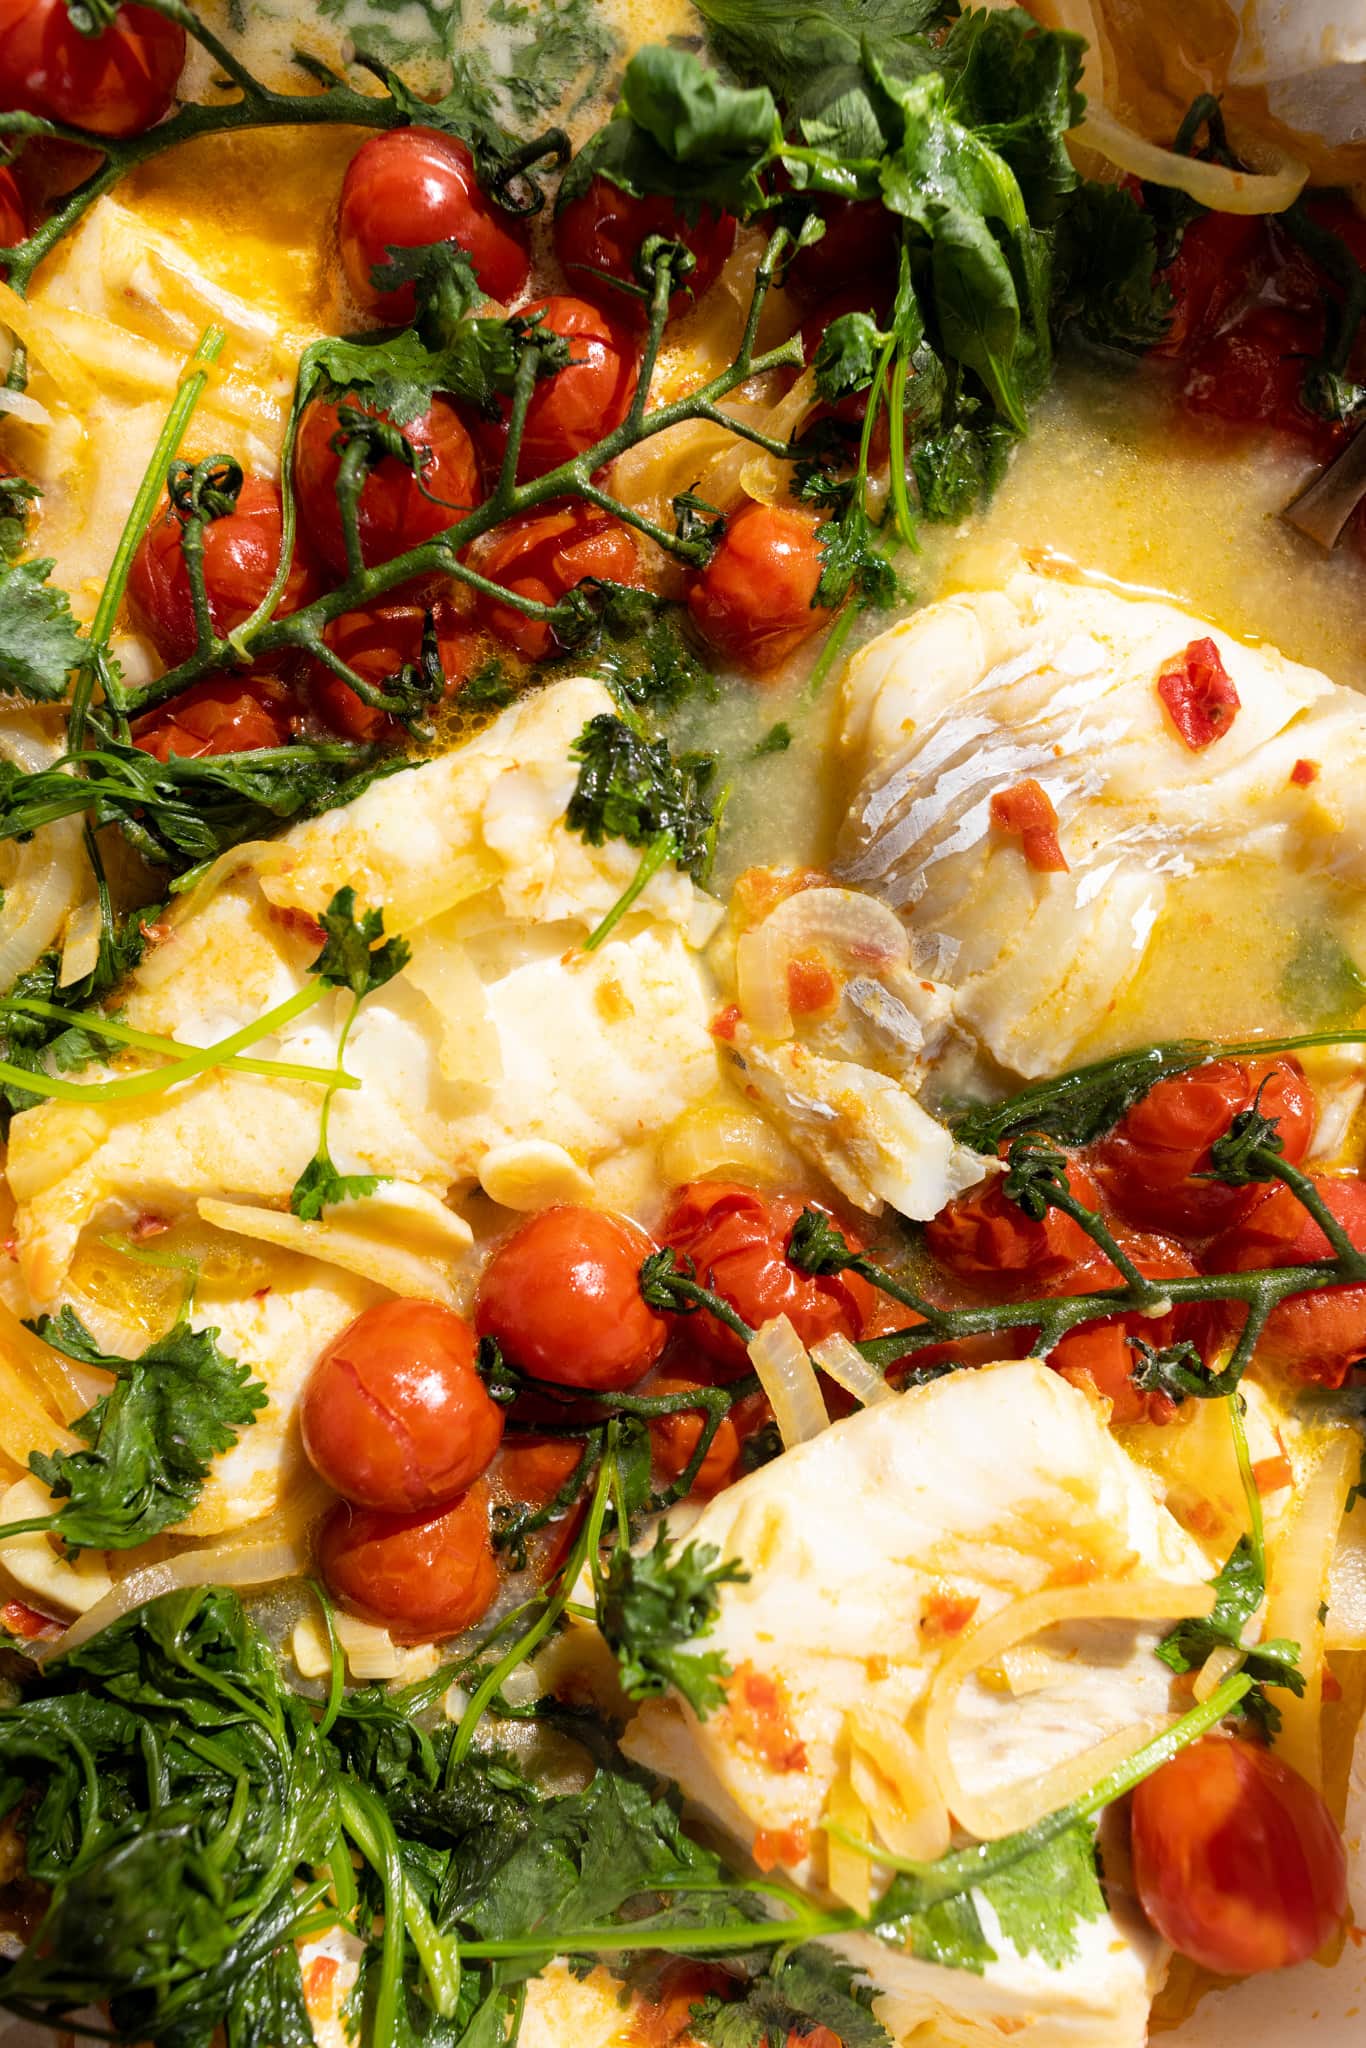 cooked coconut steamed fish with cherry tomatoes, onions,. garlic, cod, and cilantro